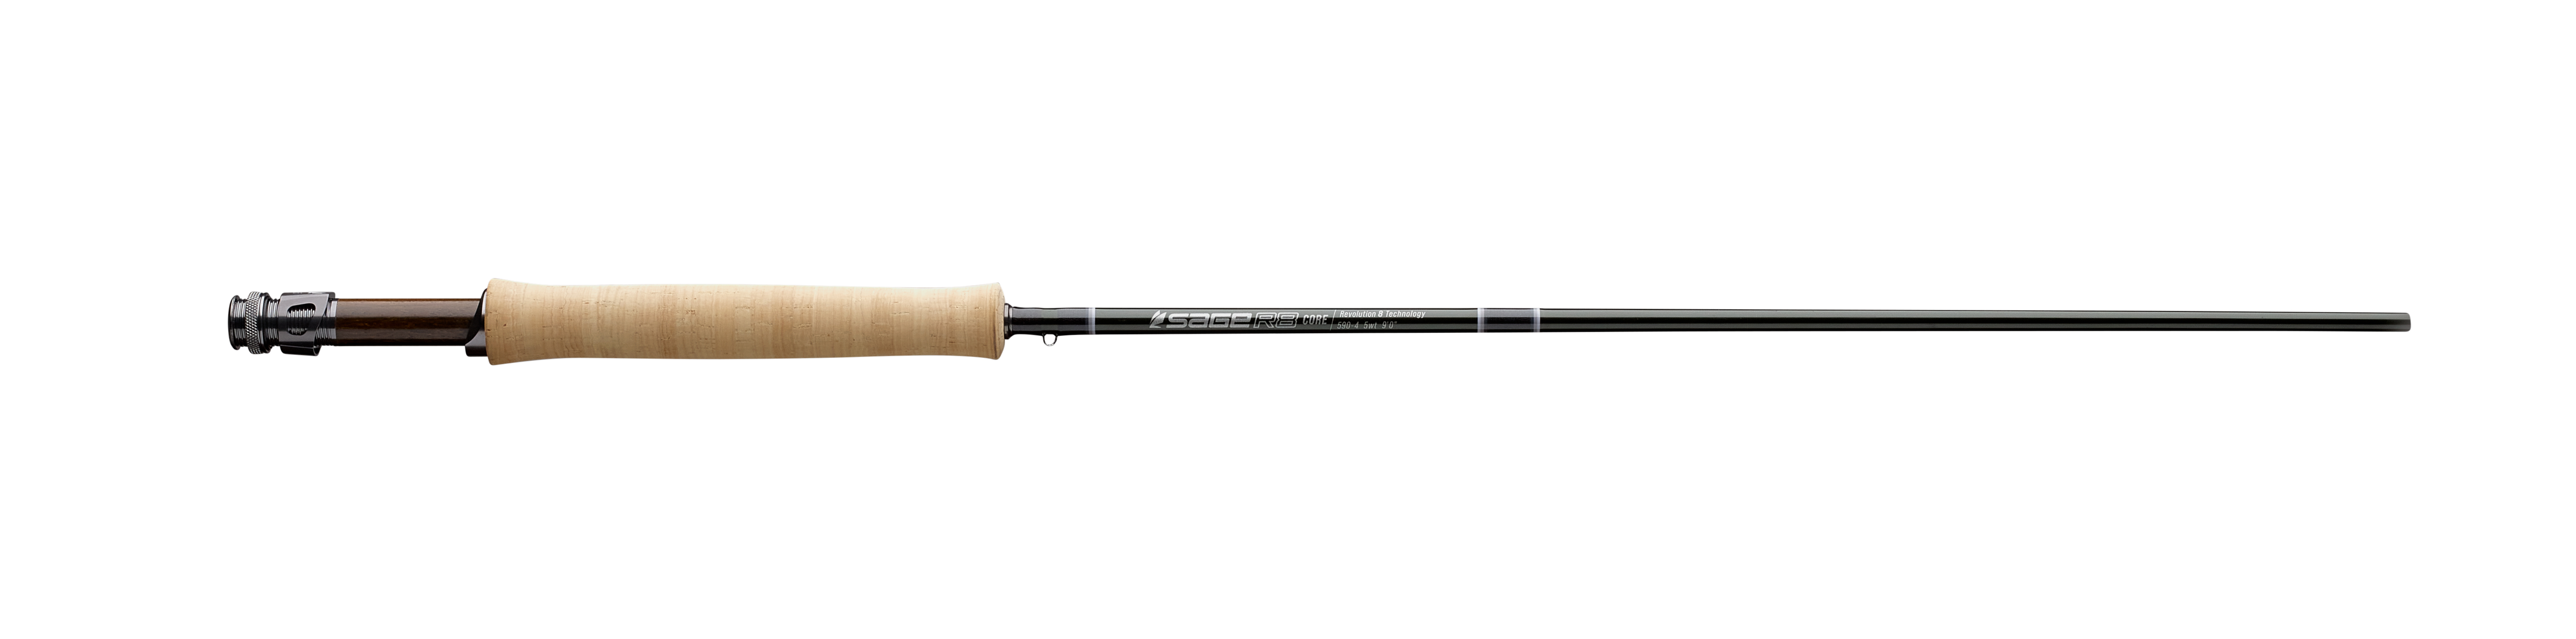 First Casts: Sage R8 Core Fly Rod Series - Western Rivers Flyfisher